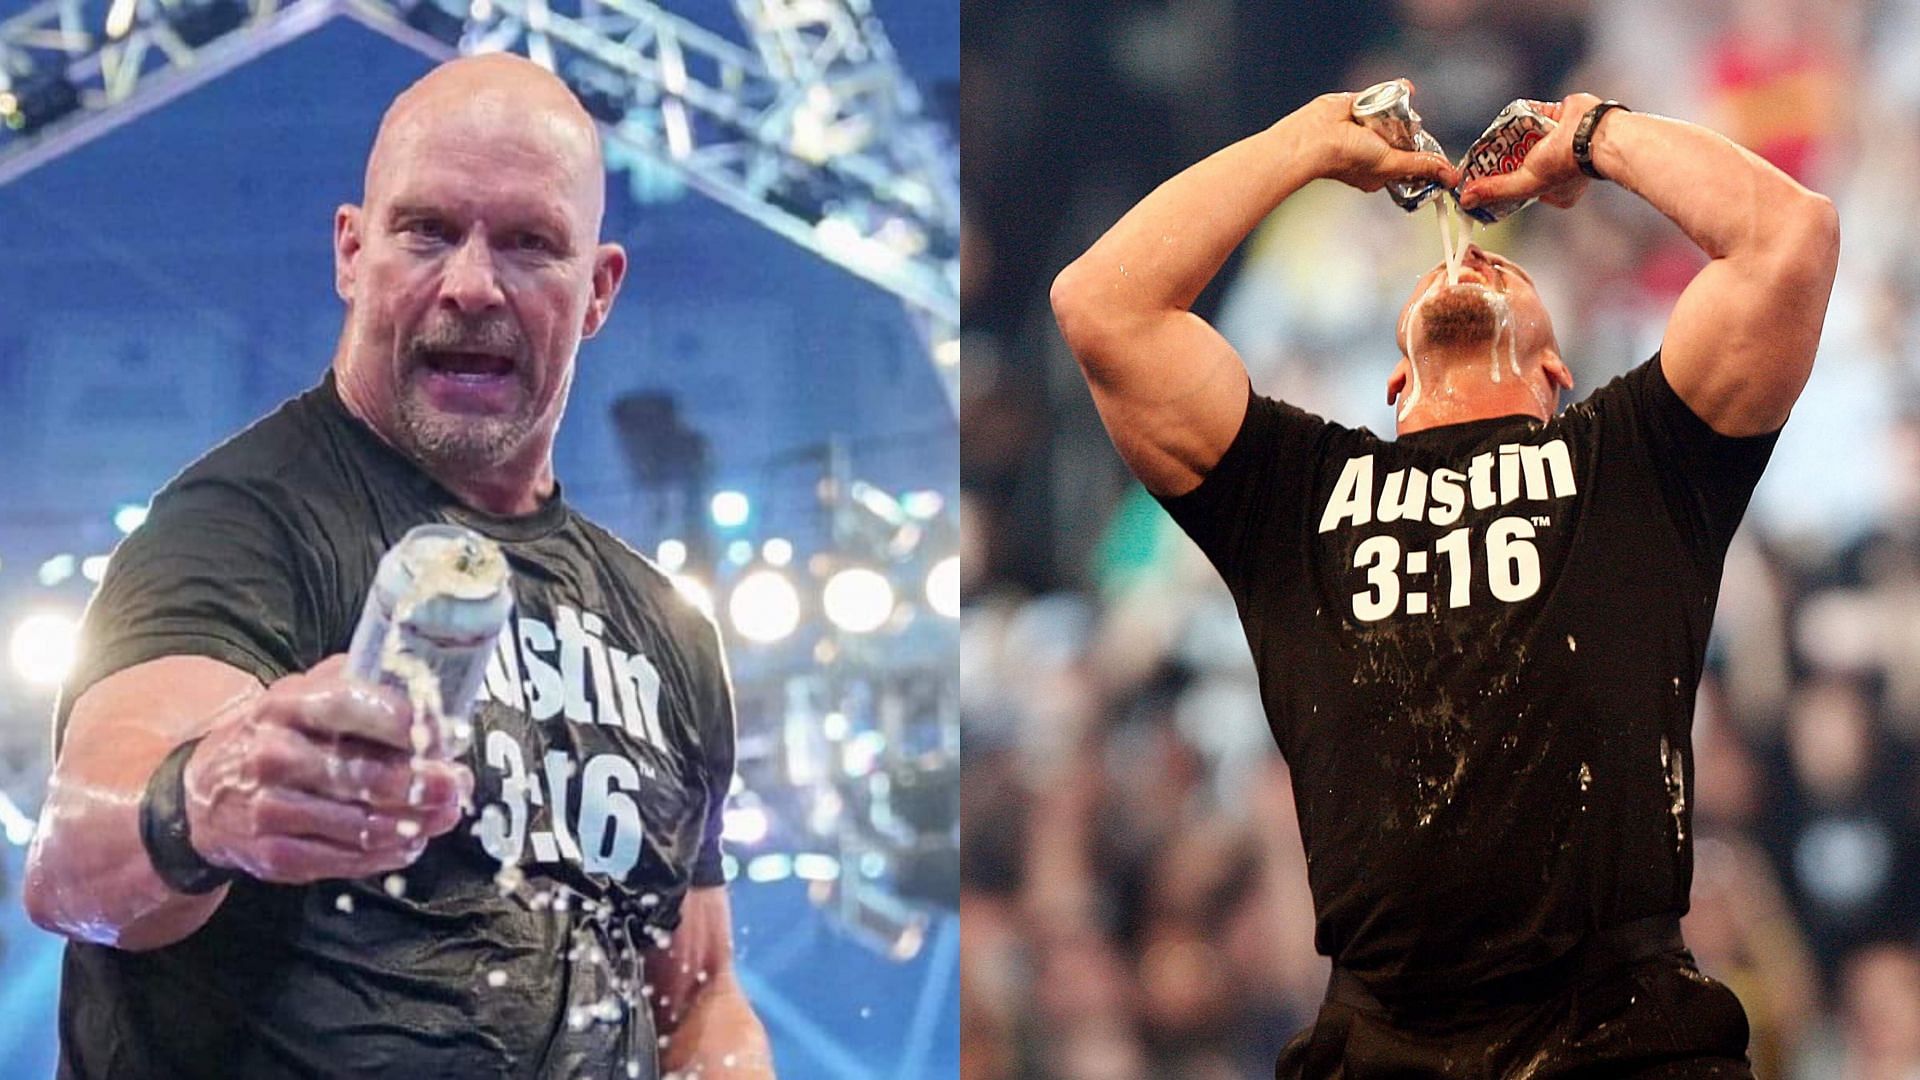 Stone Cold Steve Austin is one of WWE